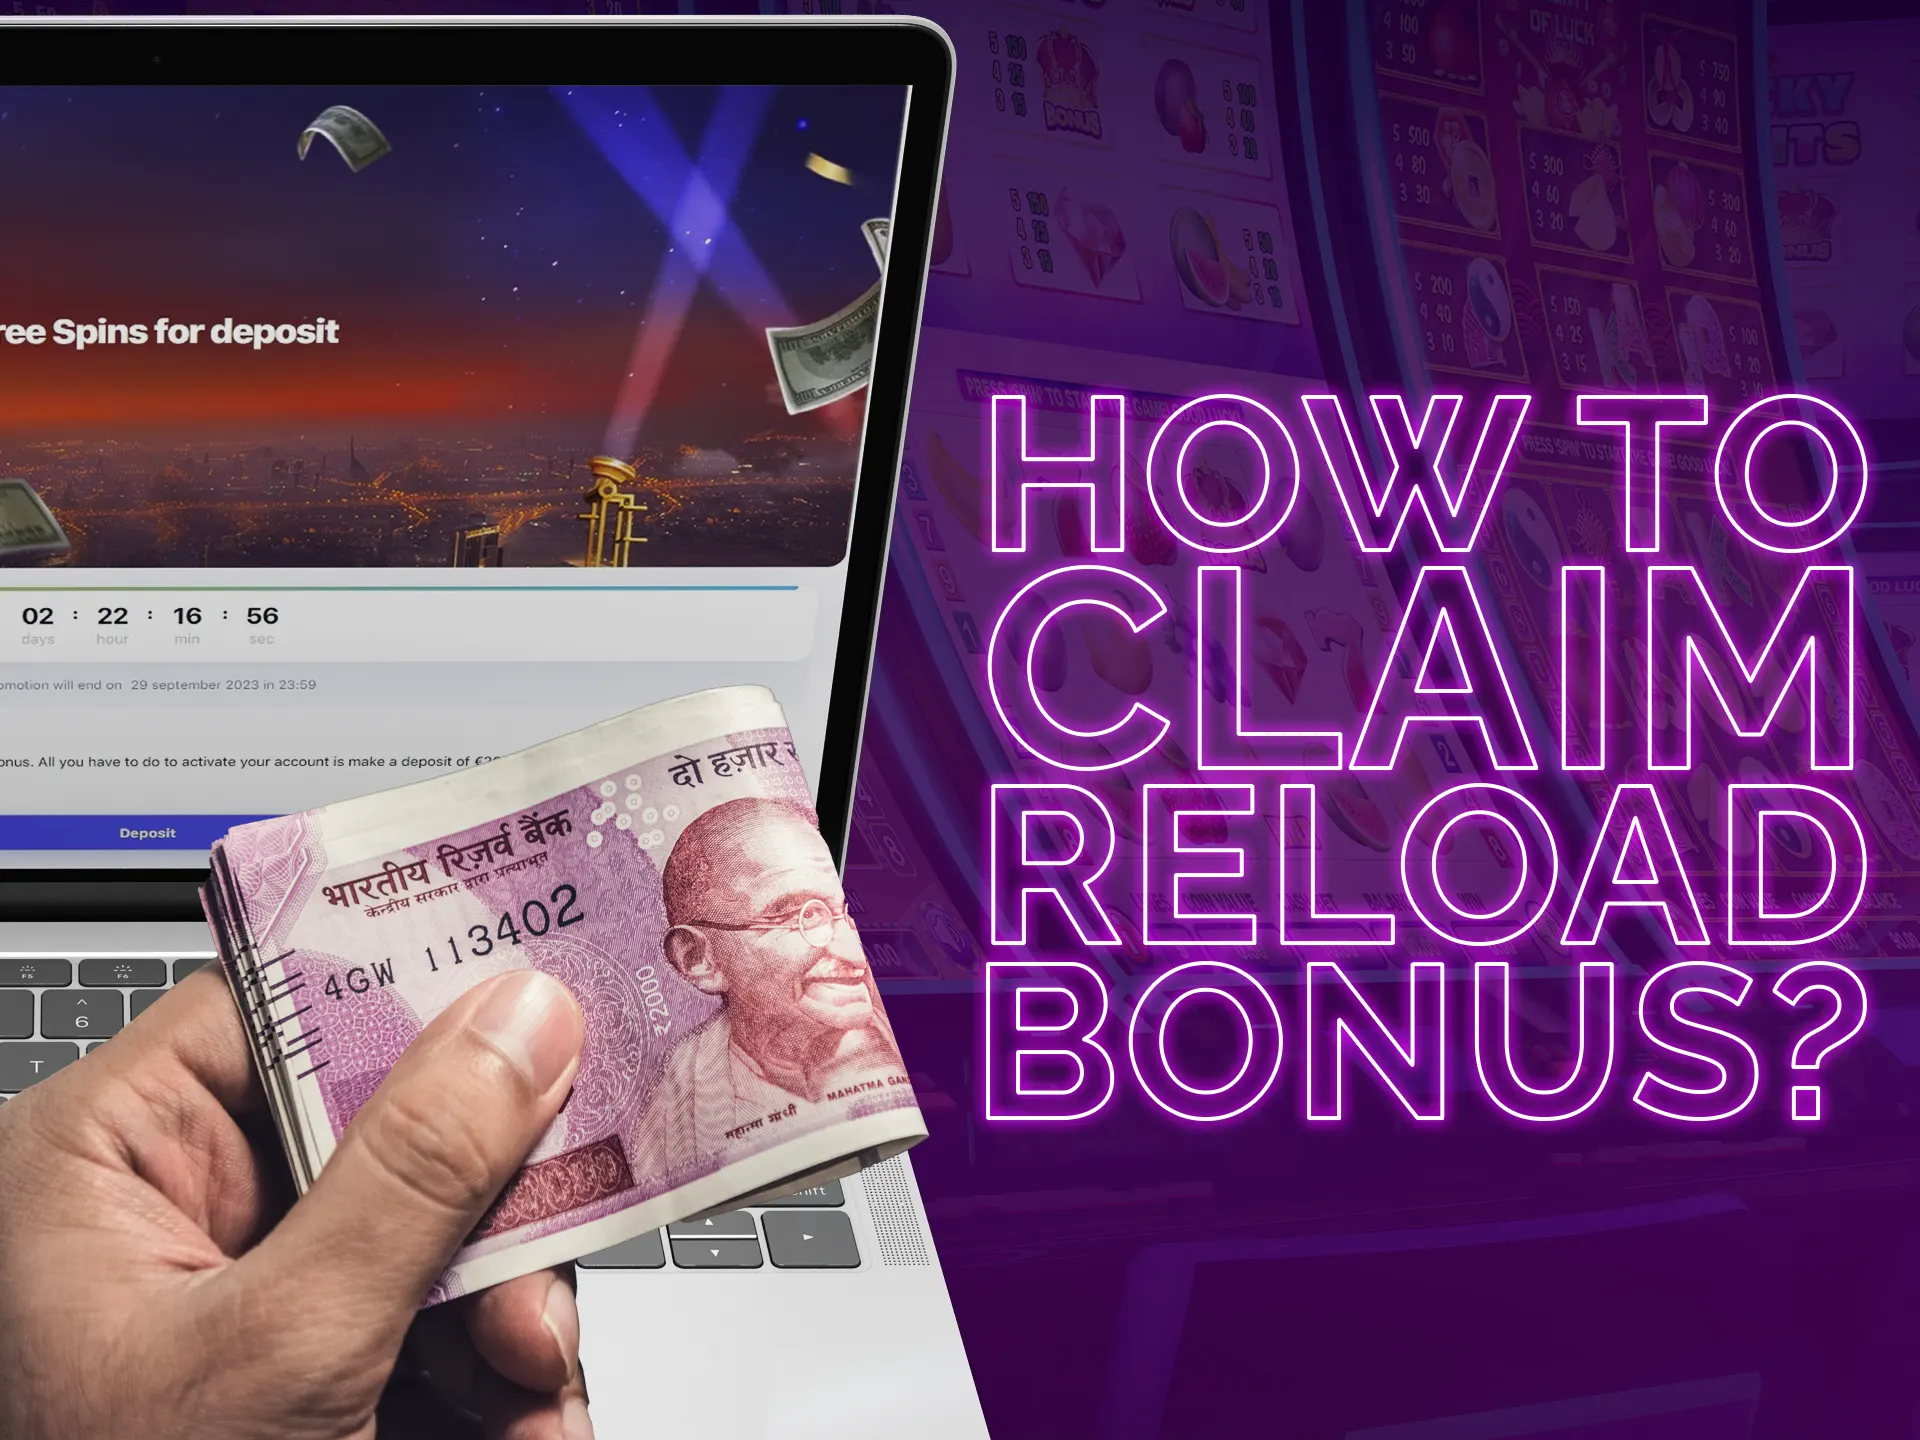 Learn how to claim the reload bonus.